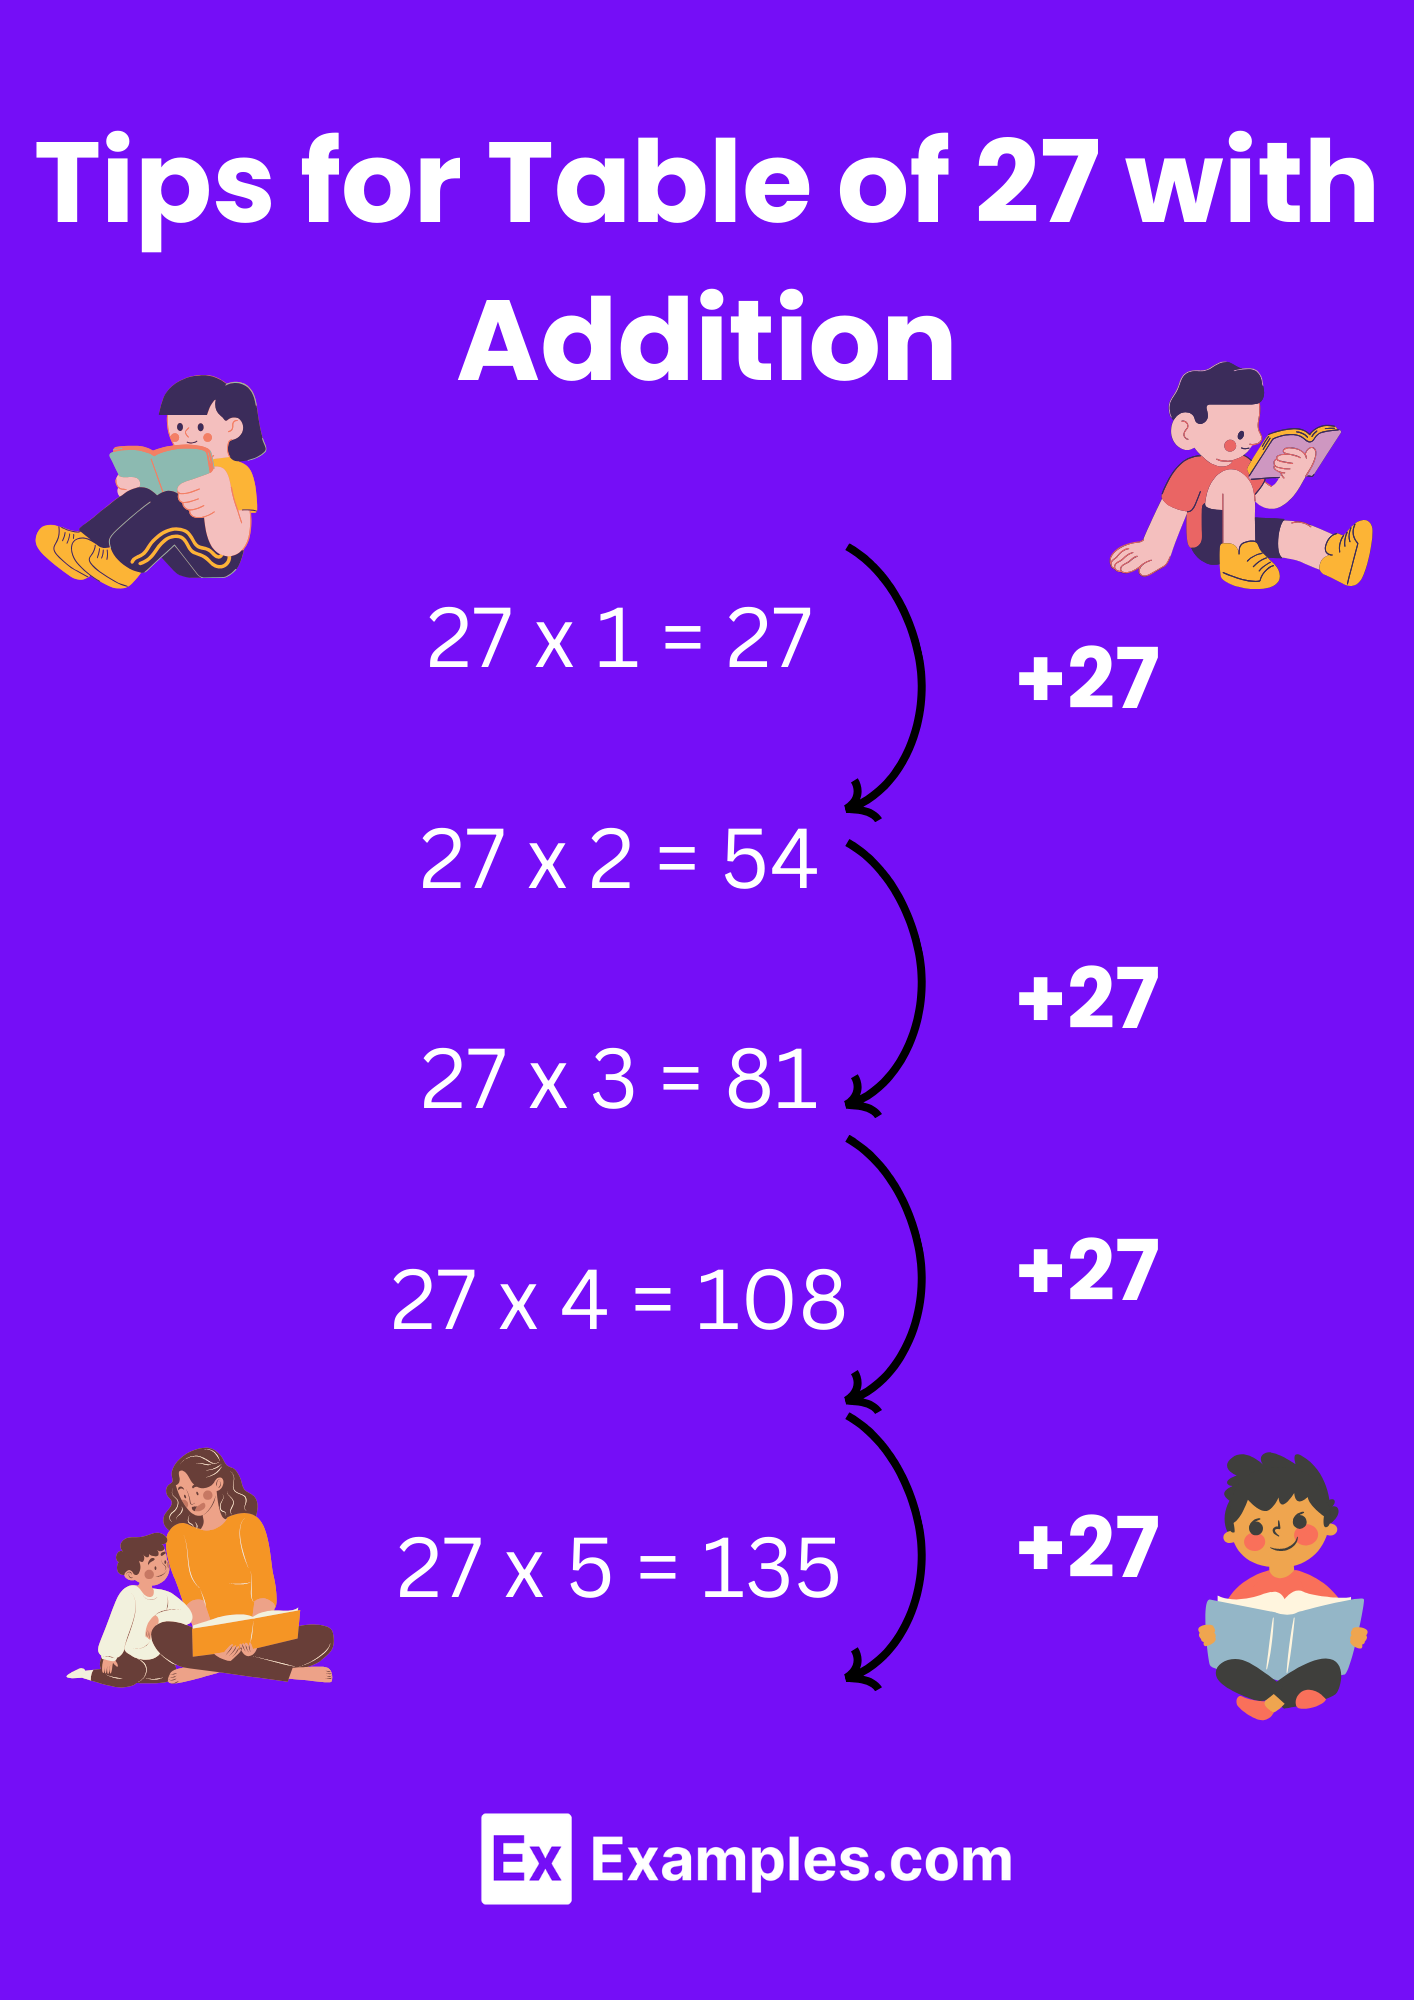 multiplication worksheets 3 and 4 times tables